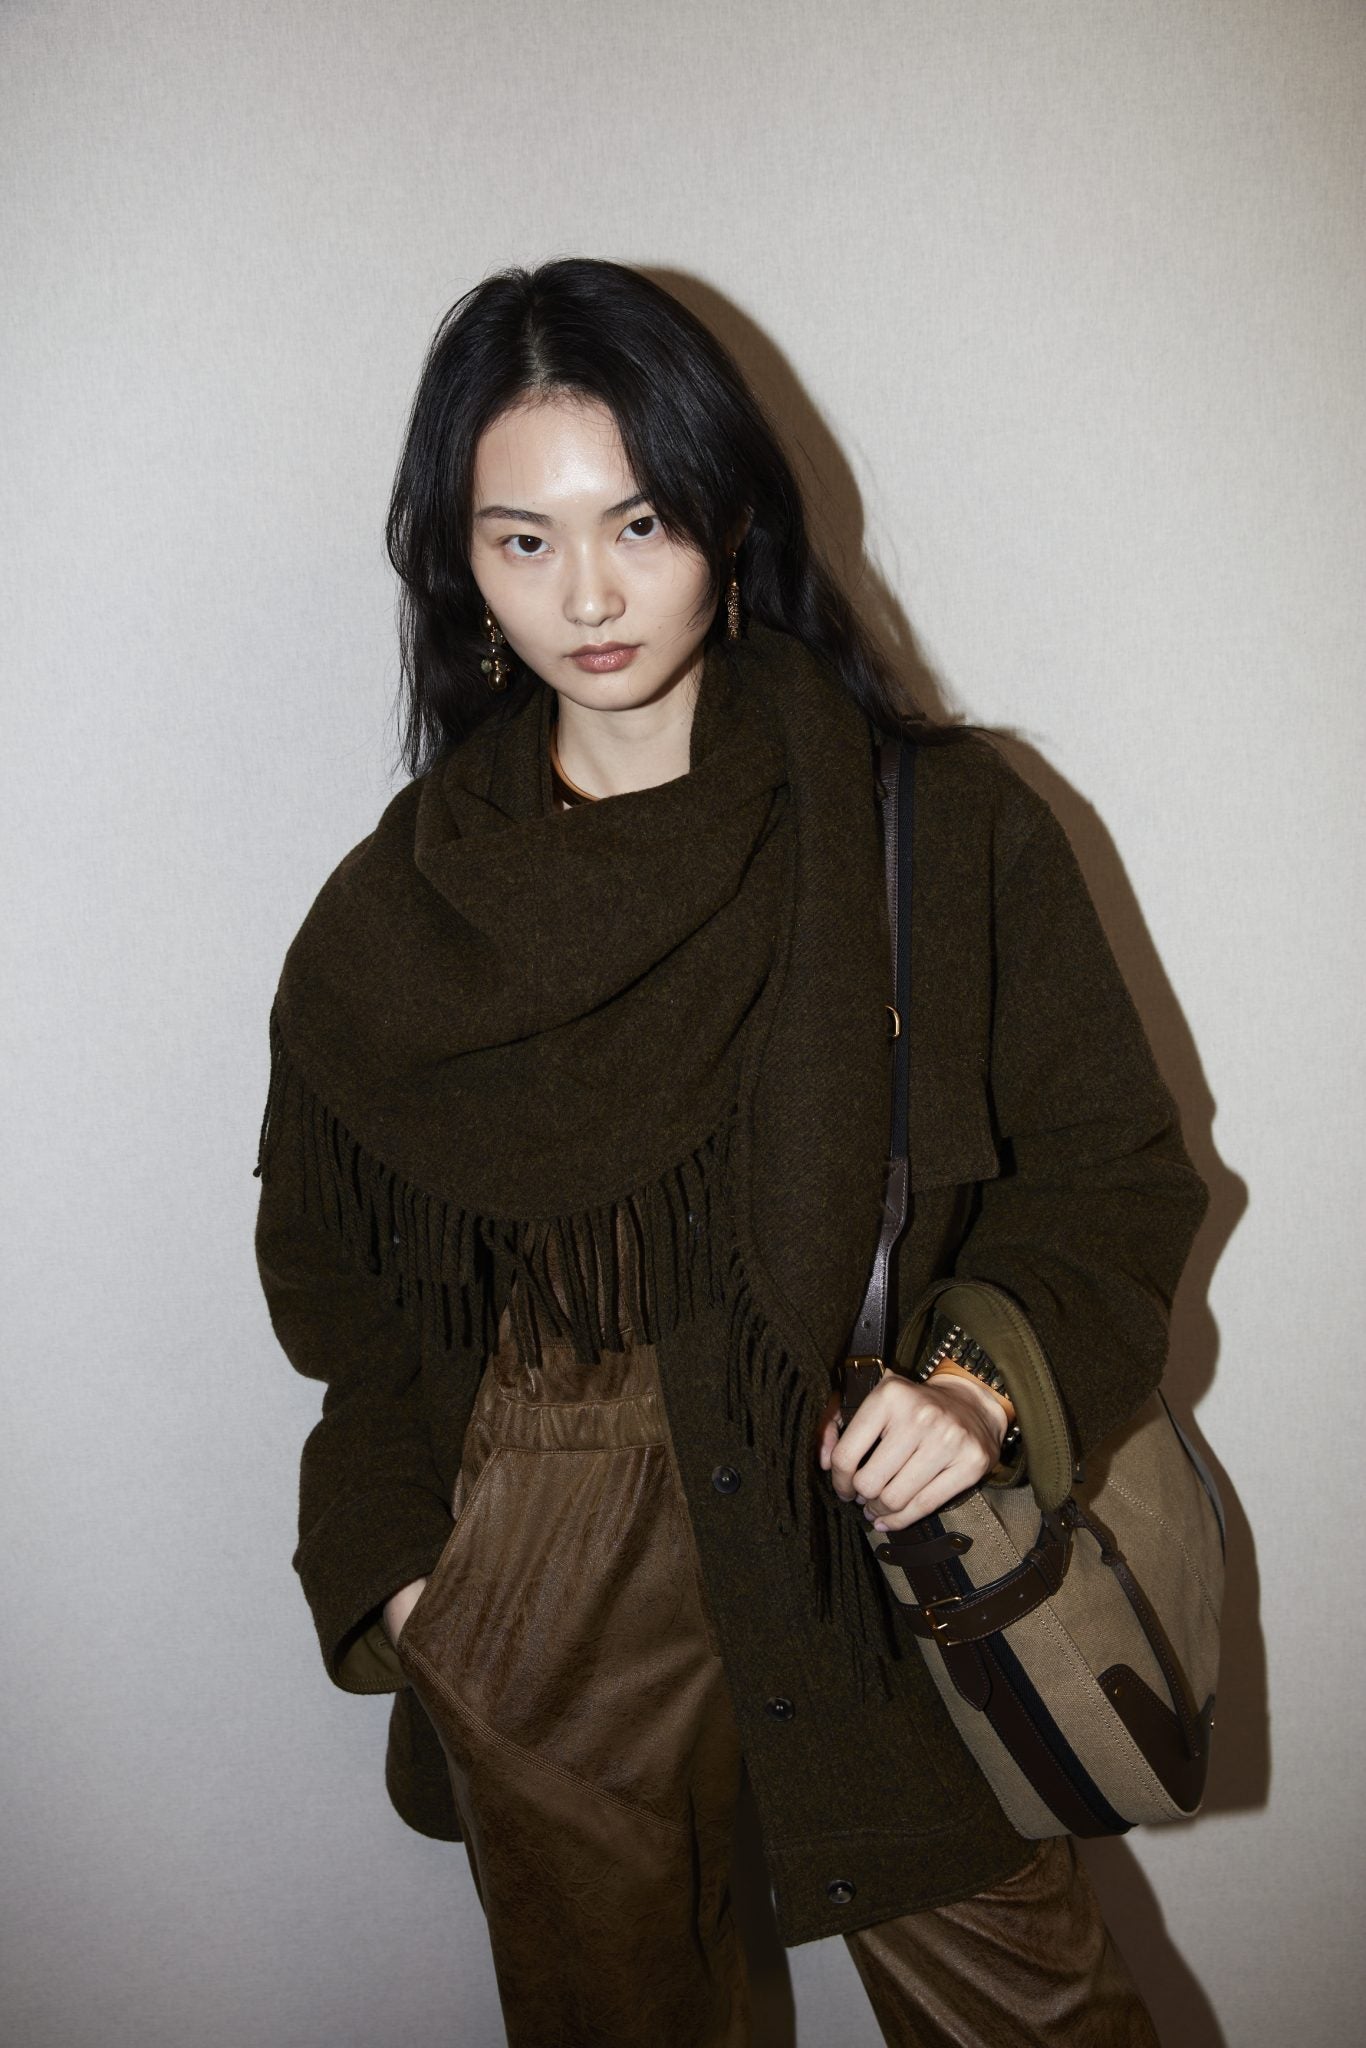 Female model wearing a dark brown jacket and fringed scarf over a chocolate brown jumpsuit and carrying an oversized tan messenger bag.